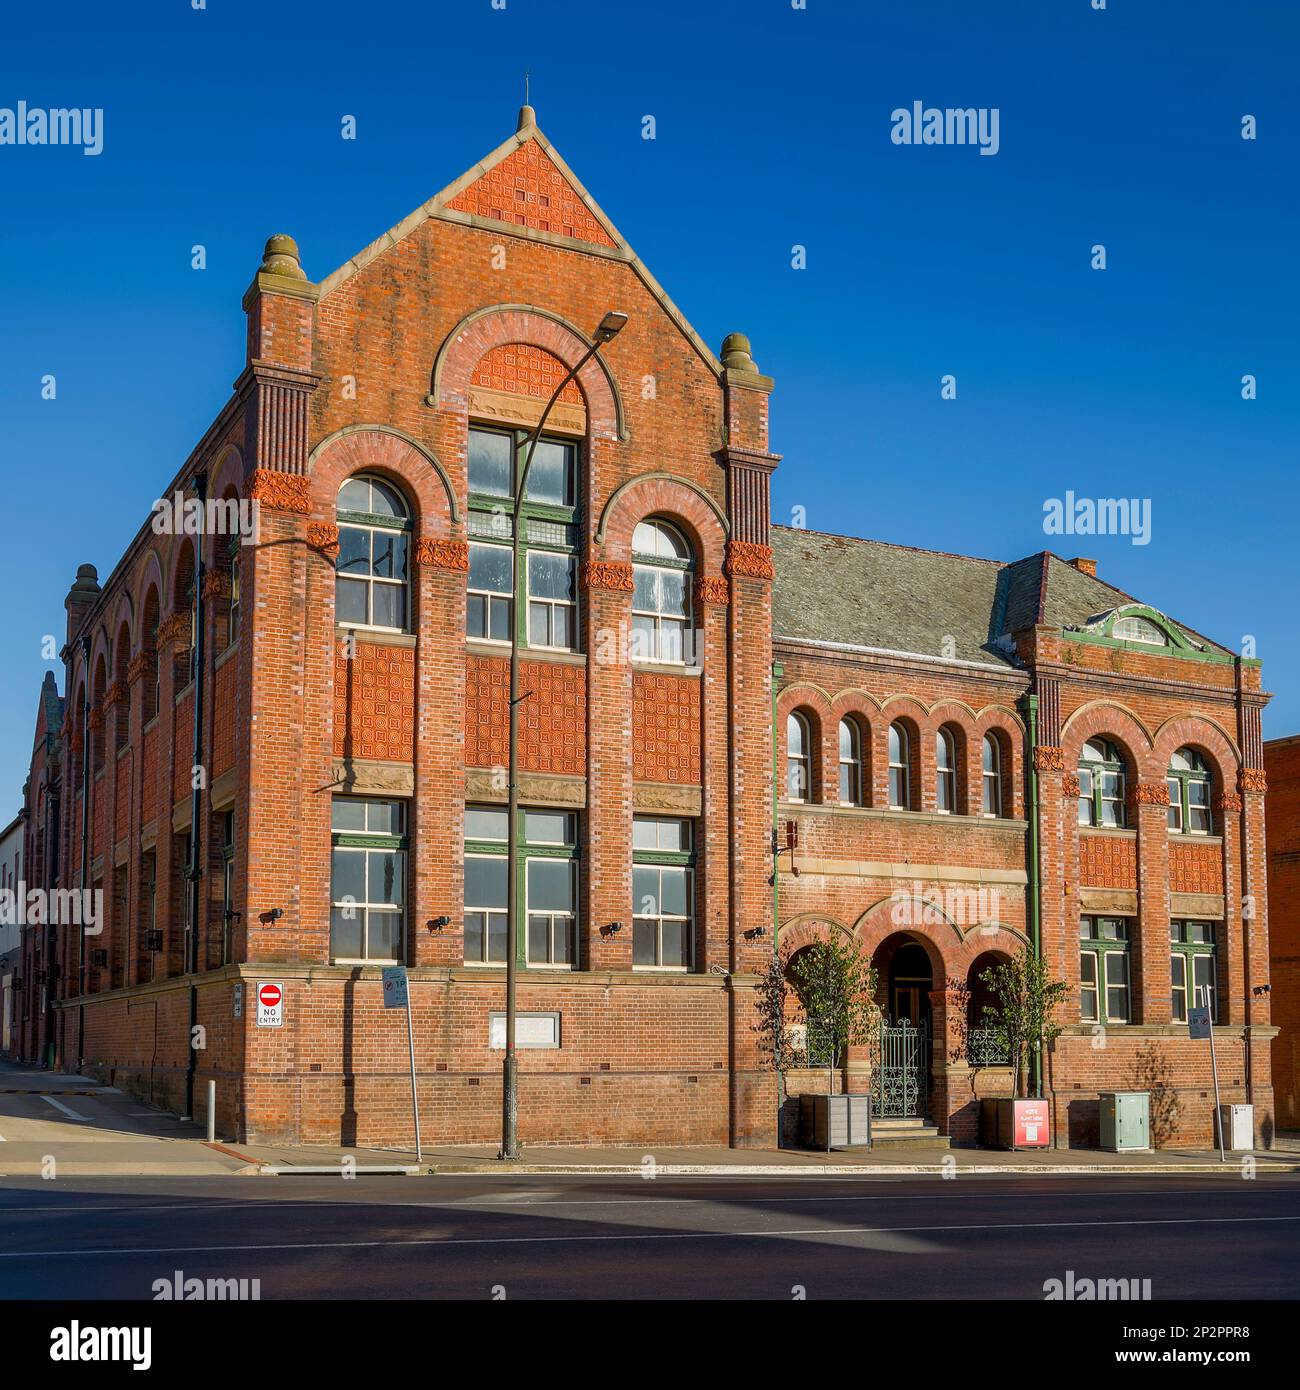 Bathurst, NSW, Australia - 8 January 2023. A grand heritage-listed brick building with arched windows from the late-Victorian era (late 19th century). Stock Photo